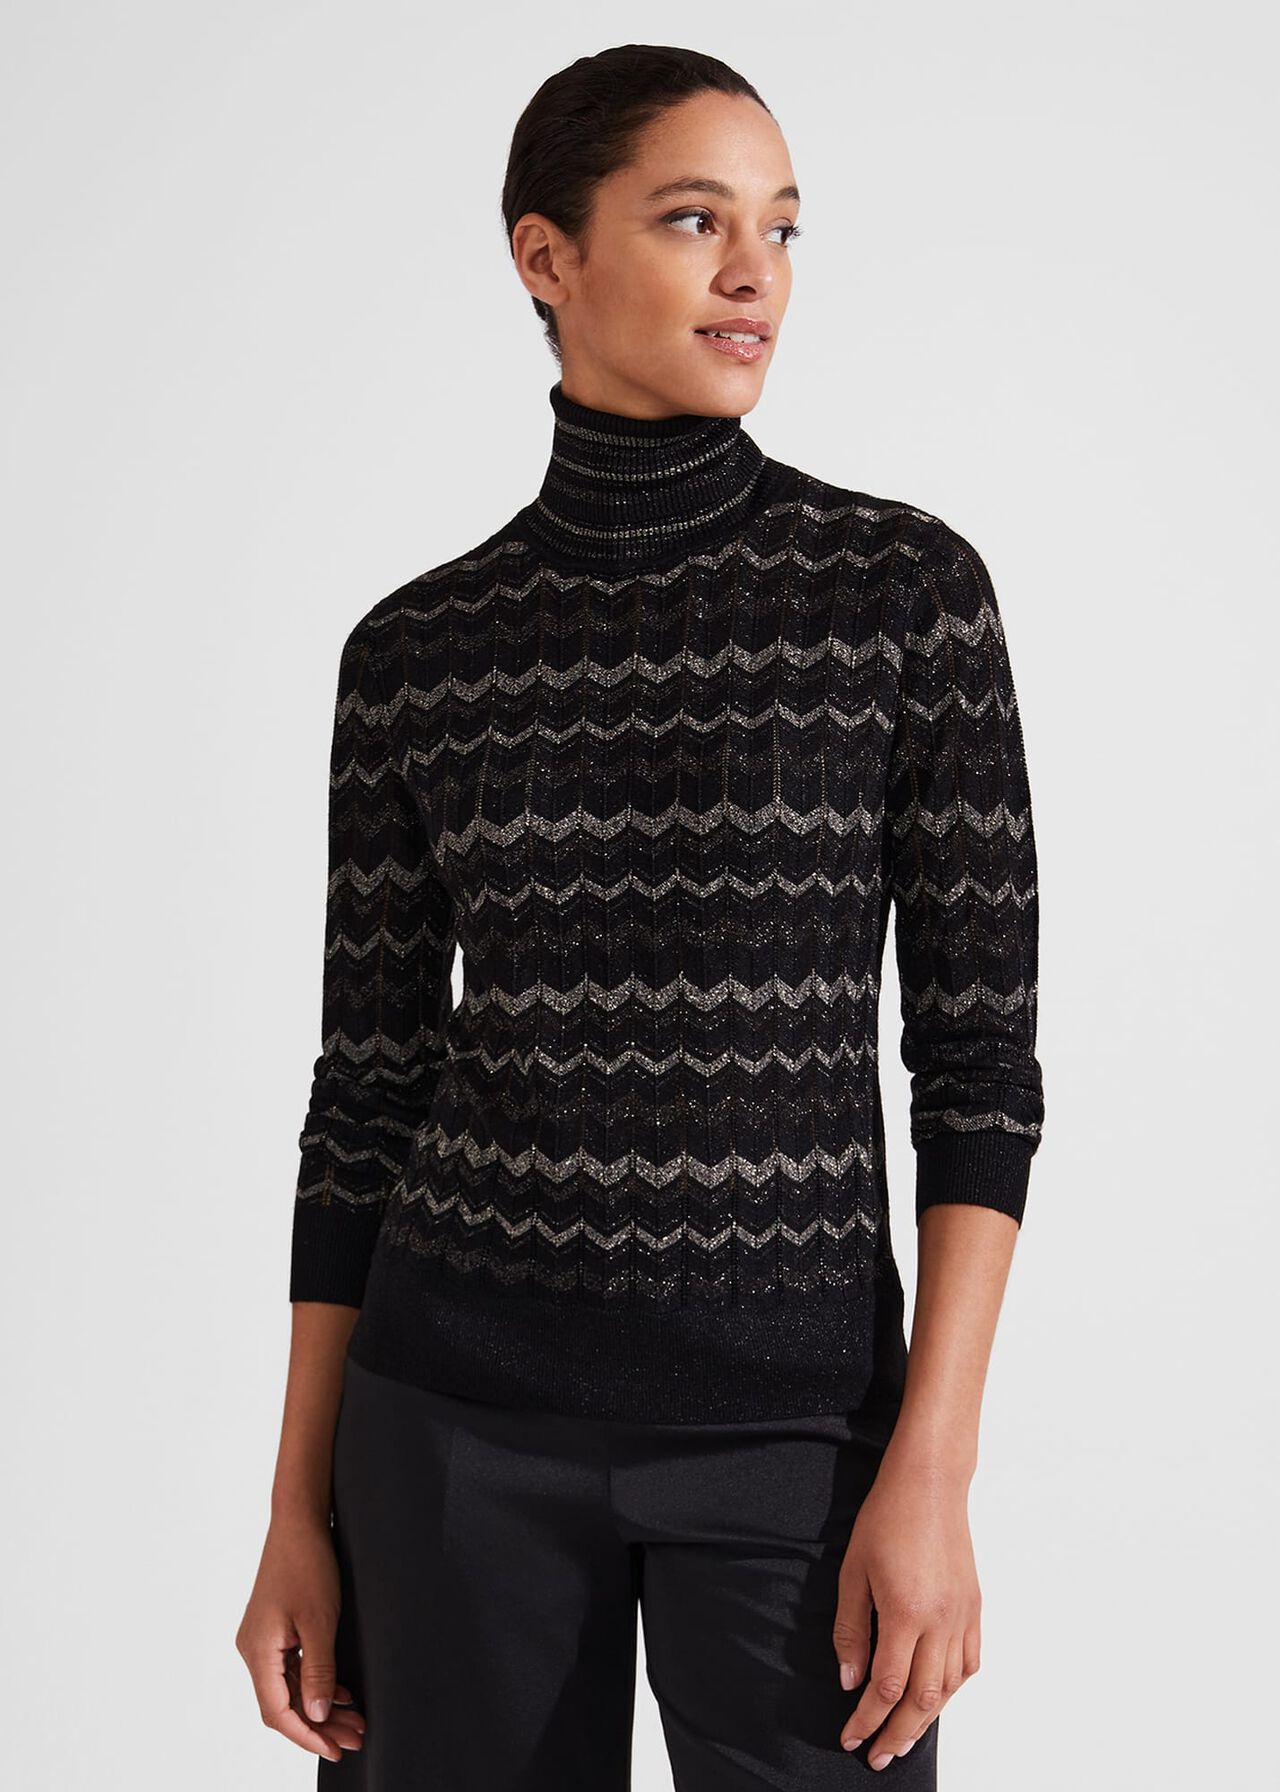 Sidonie Sparkle Sweater, Black Silver, hi-res